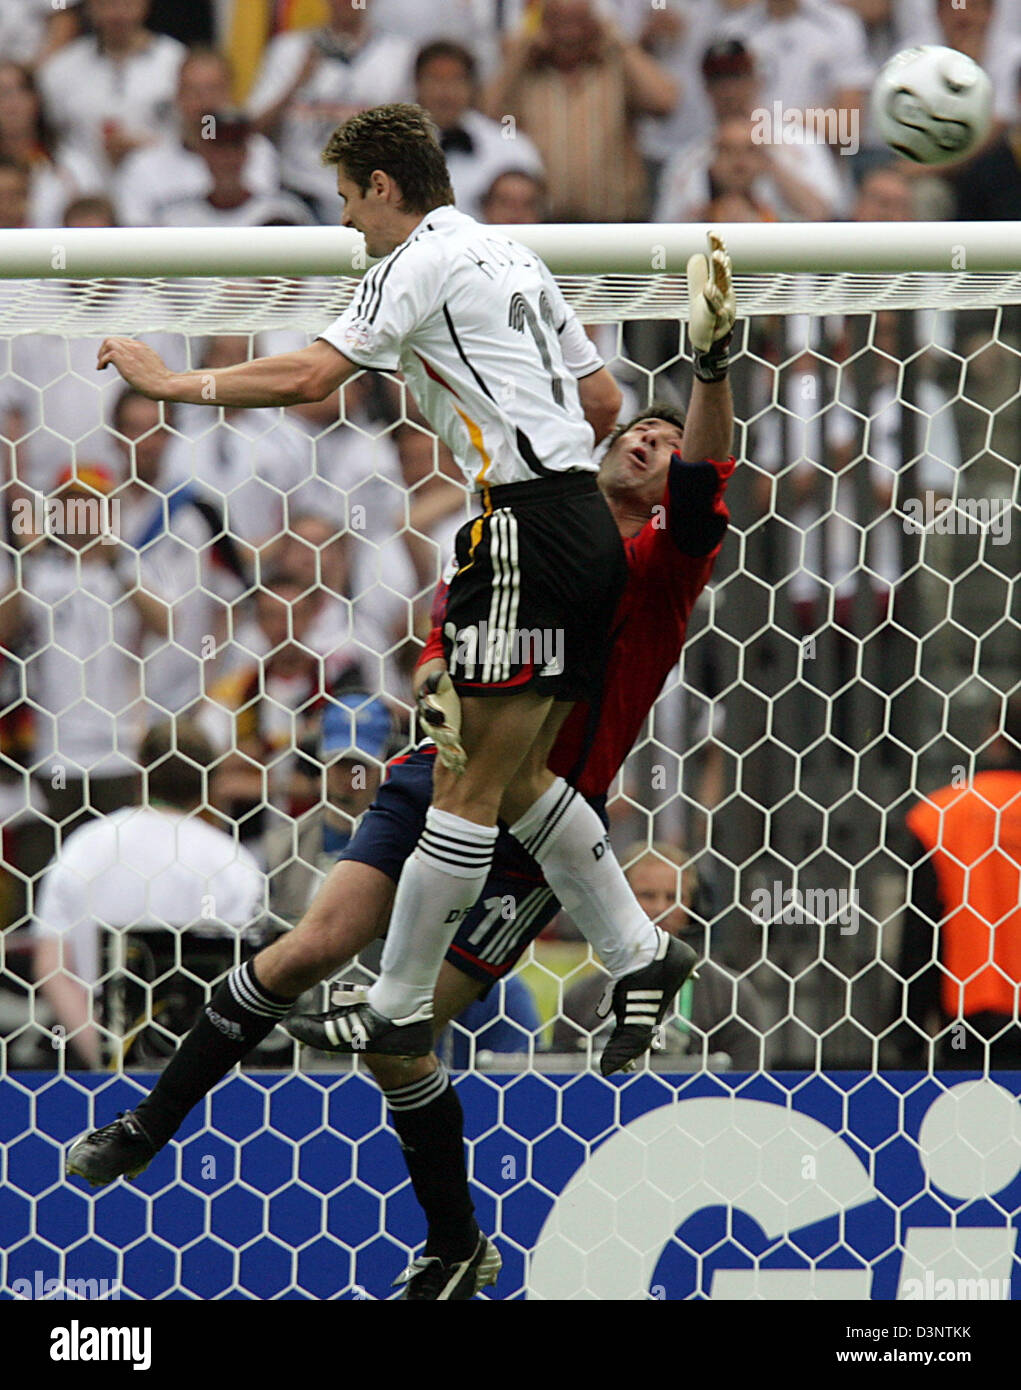 Miroslav Klose (L) of Germany vies with the keeper of Argentina Roberto Abbondanzieri during the quarter final of the 2006 FIFA World Cup between Germany and Argentina at the Olympic Stadium in Berlin, Germany, Friday, 30 June 2006. Photo: OLIVER BERG +++ Mobile Services OUT +++ Please refer to FIFA's Terms and Conditions. Stock Photo